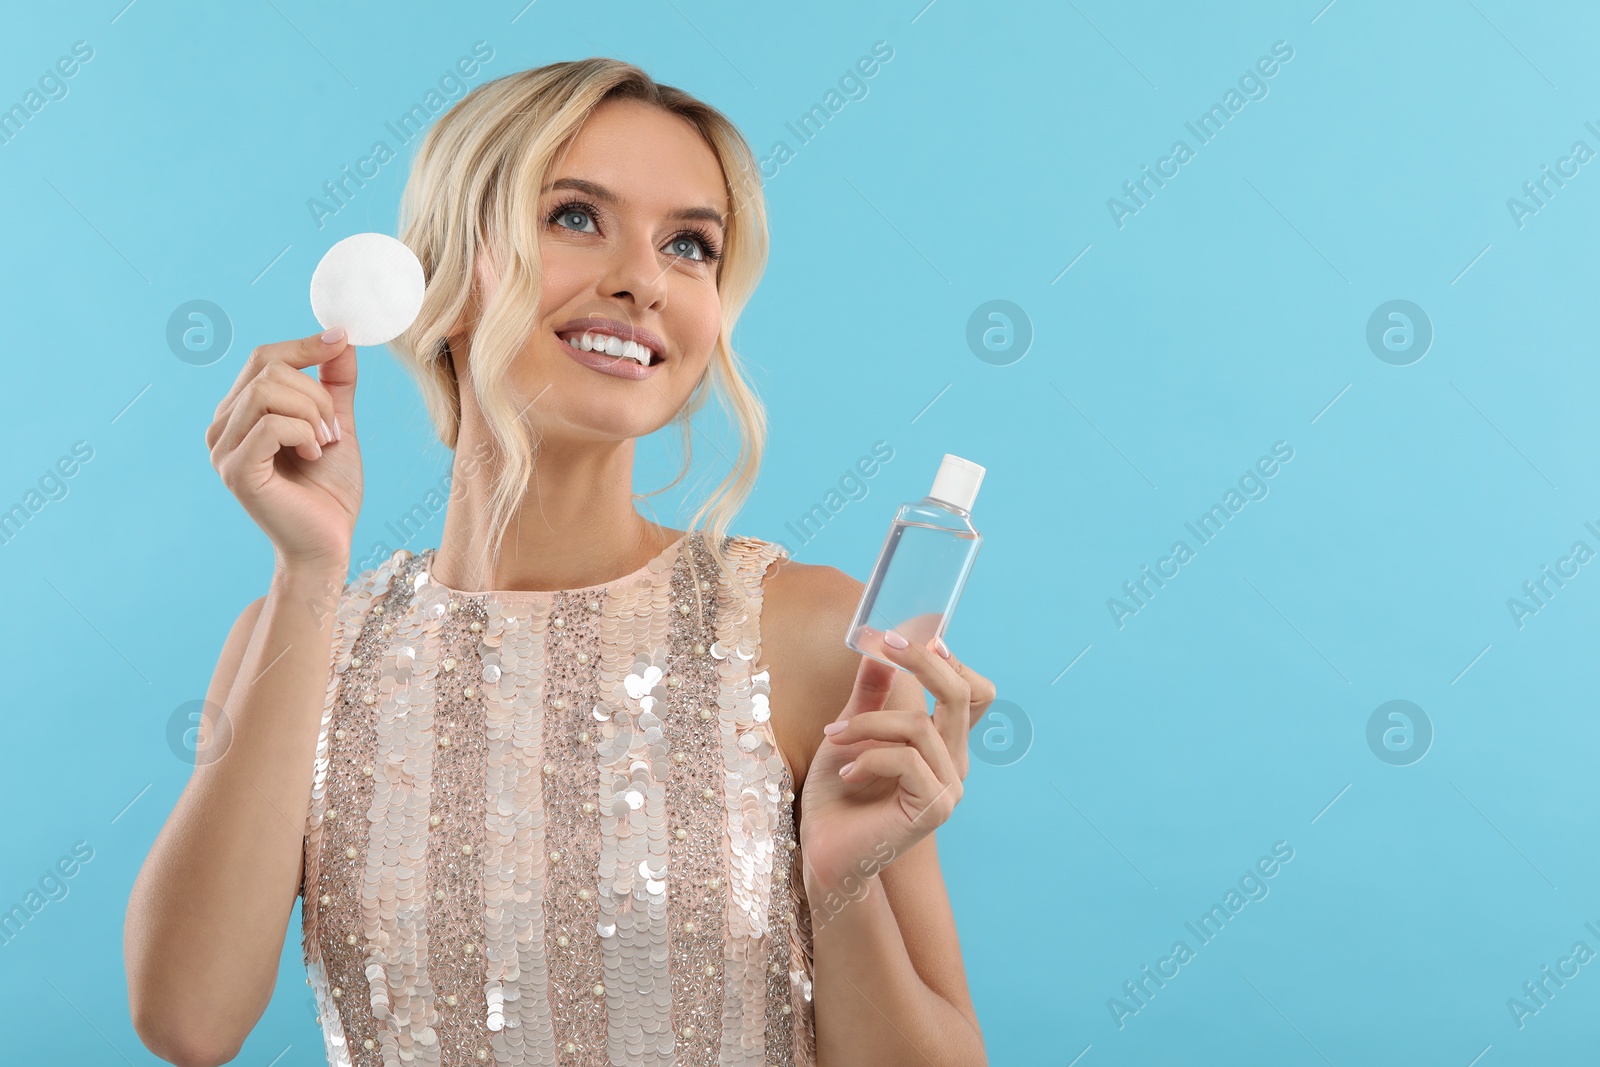 Photo of Smiling woman removing makeup with cotton pad and holding bottle on light blue background. Space for text